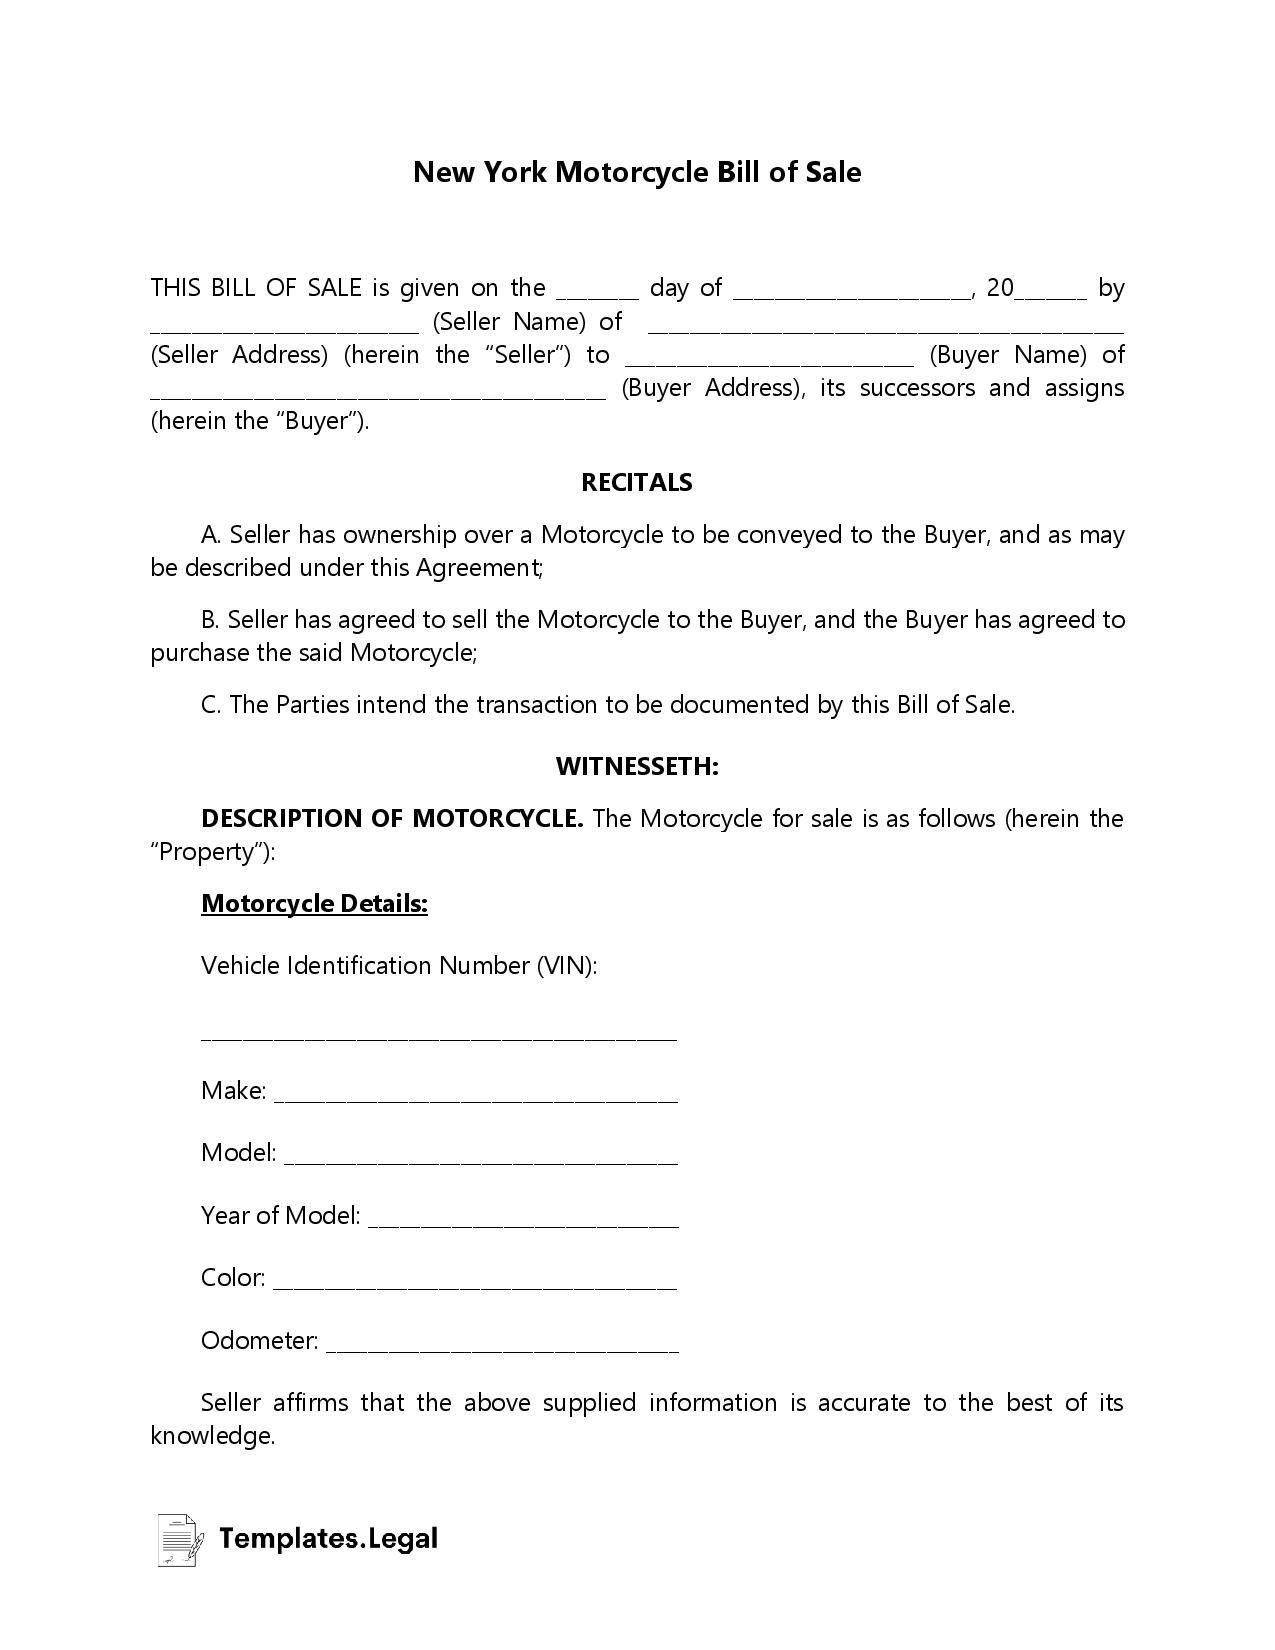 New York Motorcycle Bill of Sale - Templates.Legal